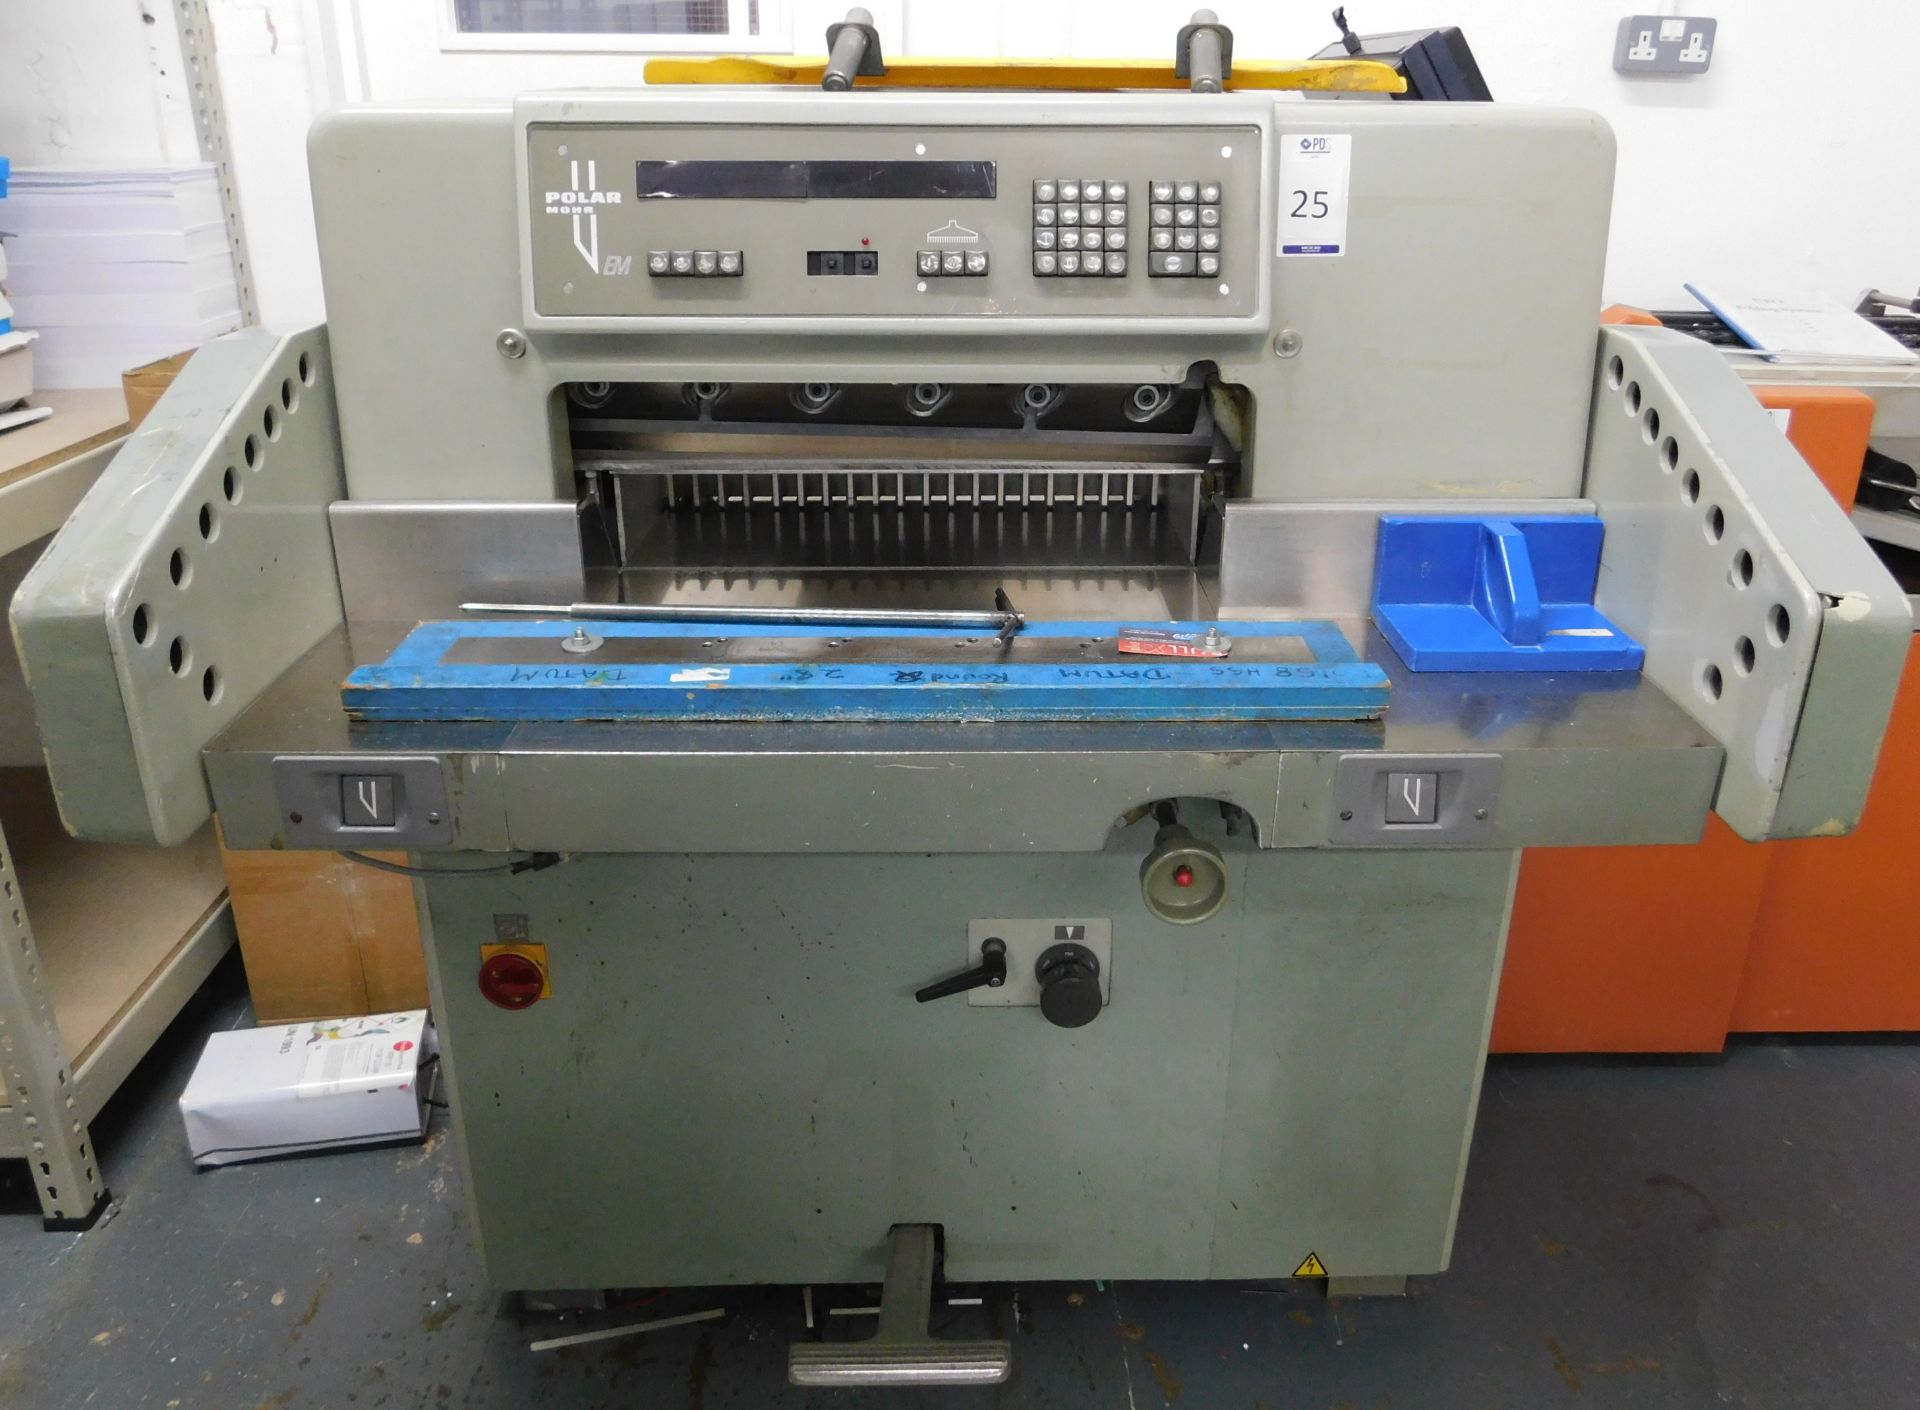 Polar Mohr Model 58 Guillotine Serial Number 6251005, Single Phase (Location: Hatfield - See General